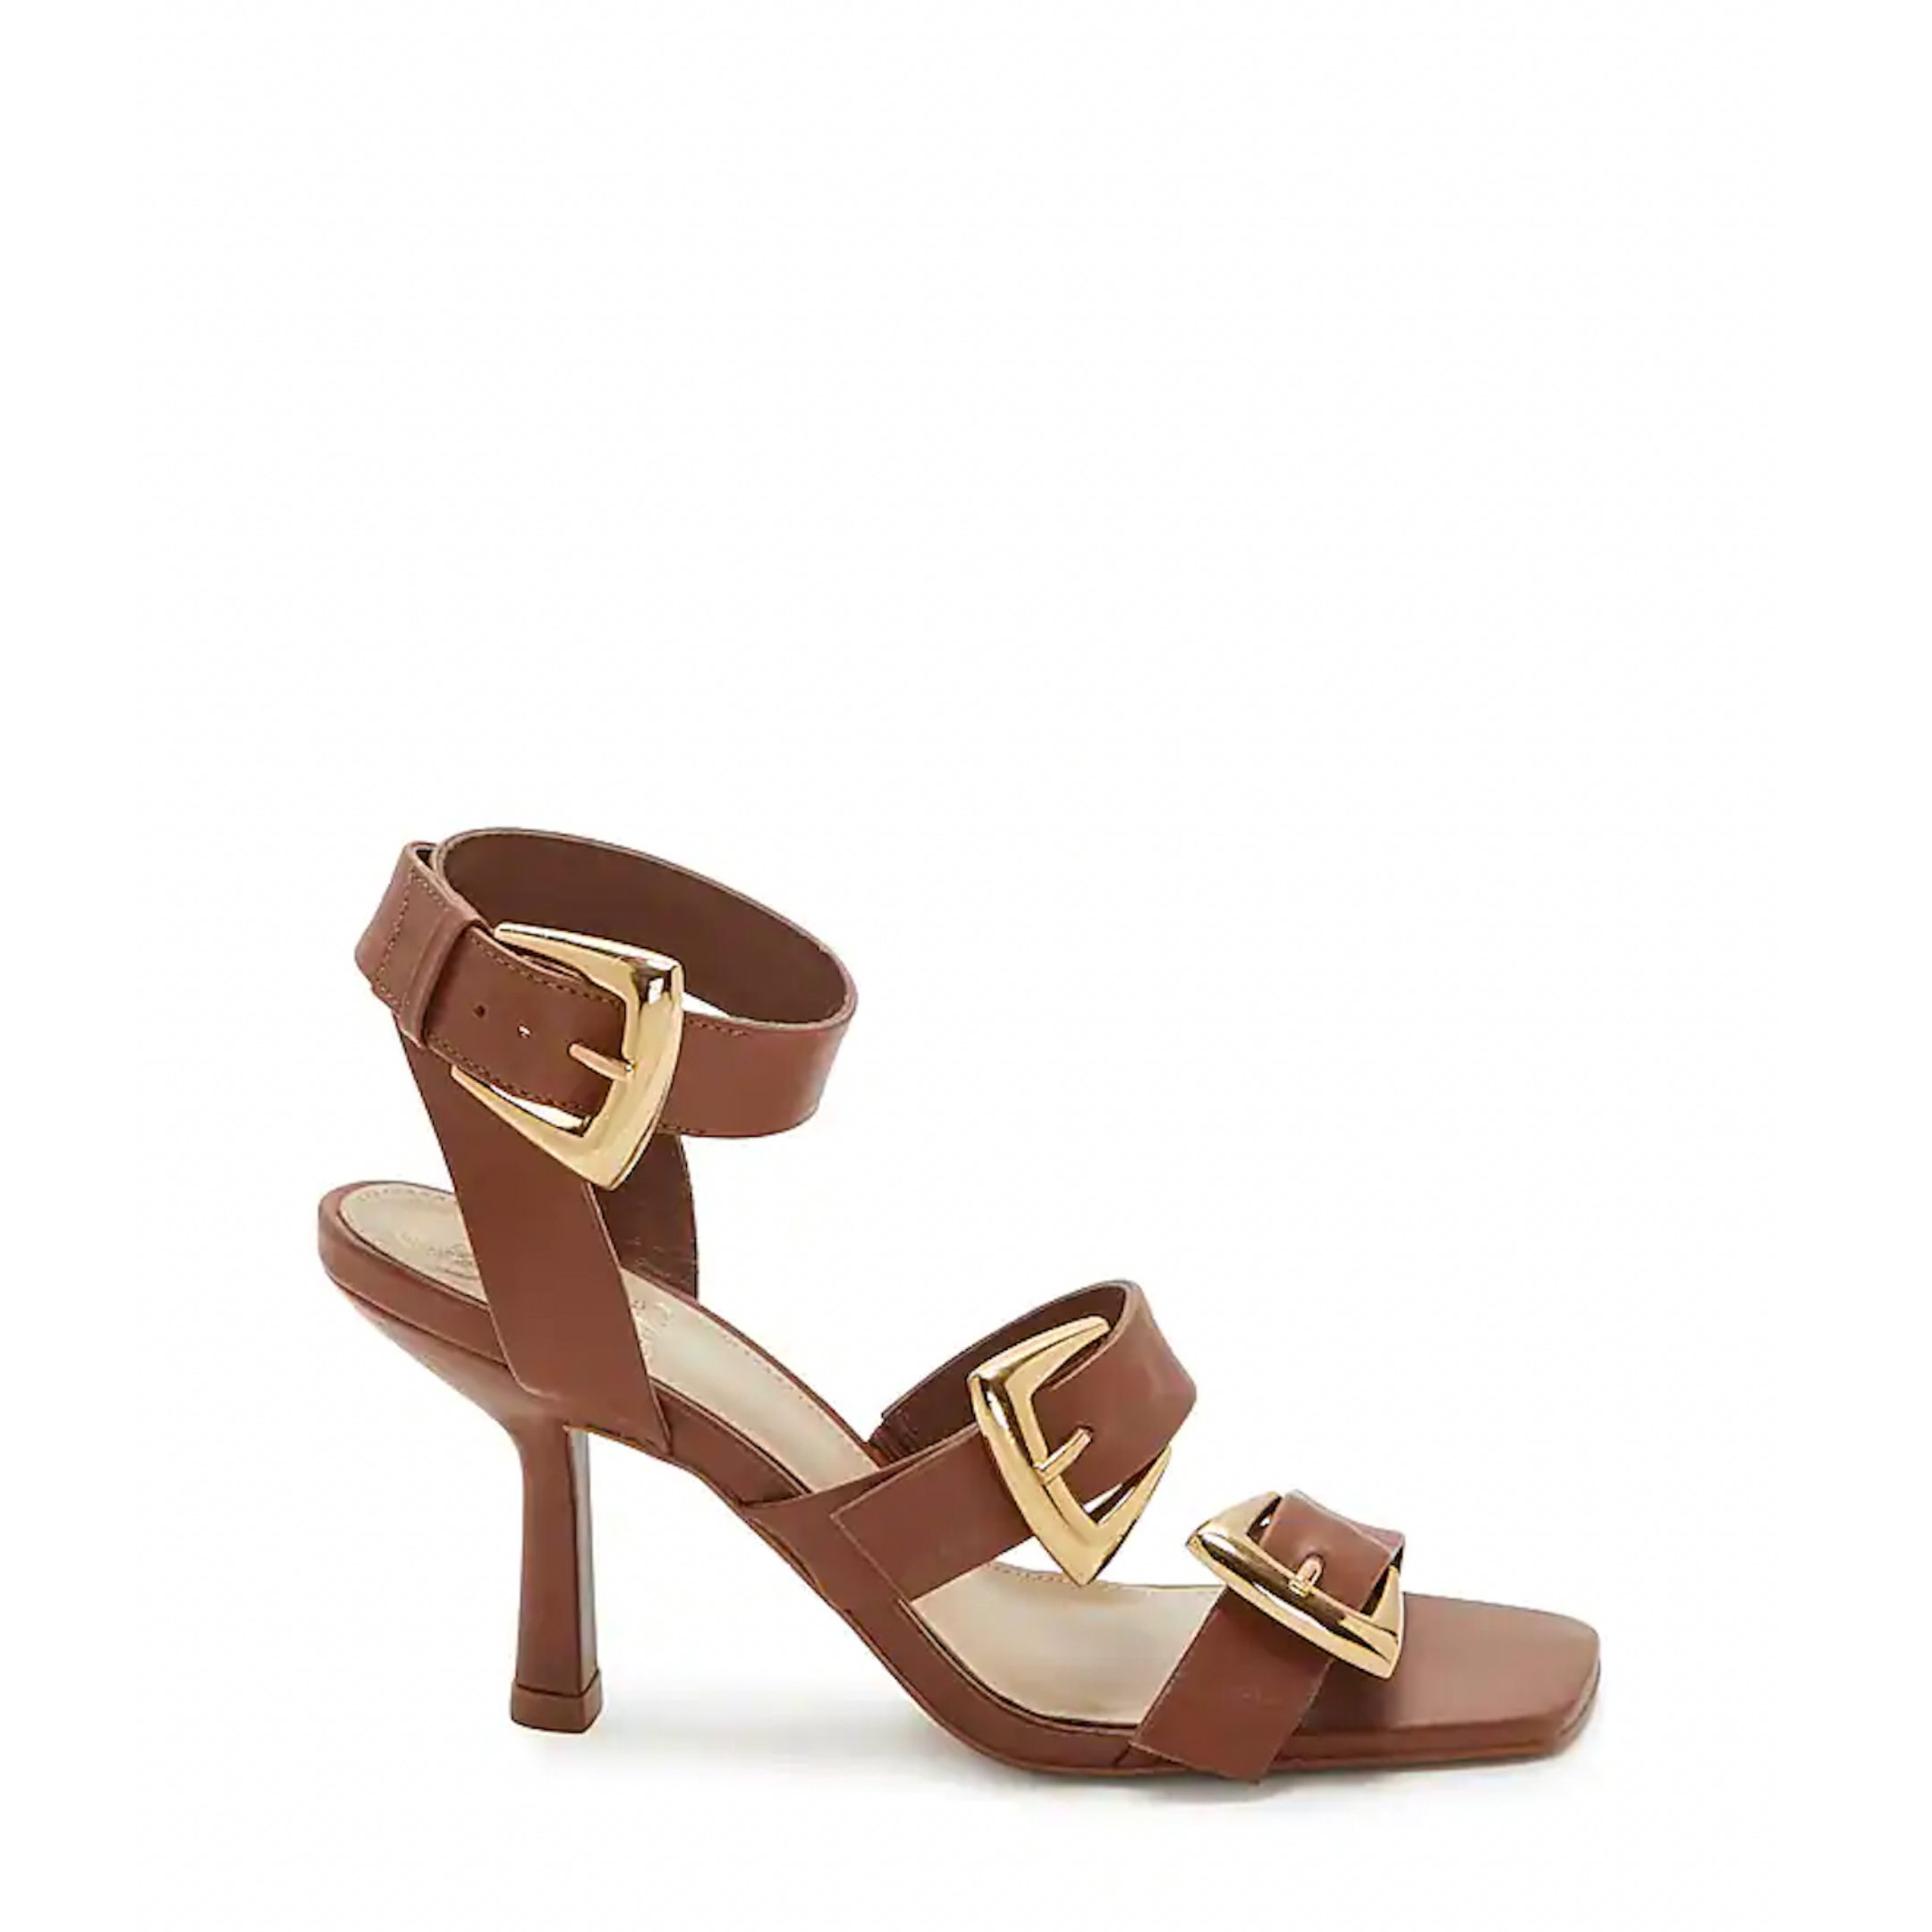 Vince Camuto's Sale Includes The Chicest Shoes And Accessories For Summer